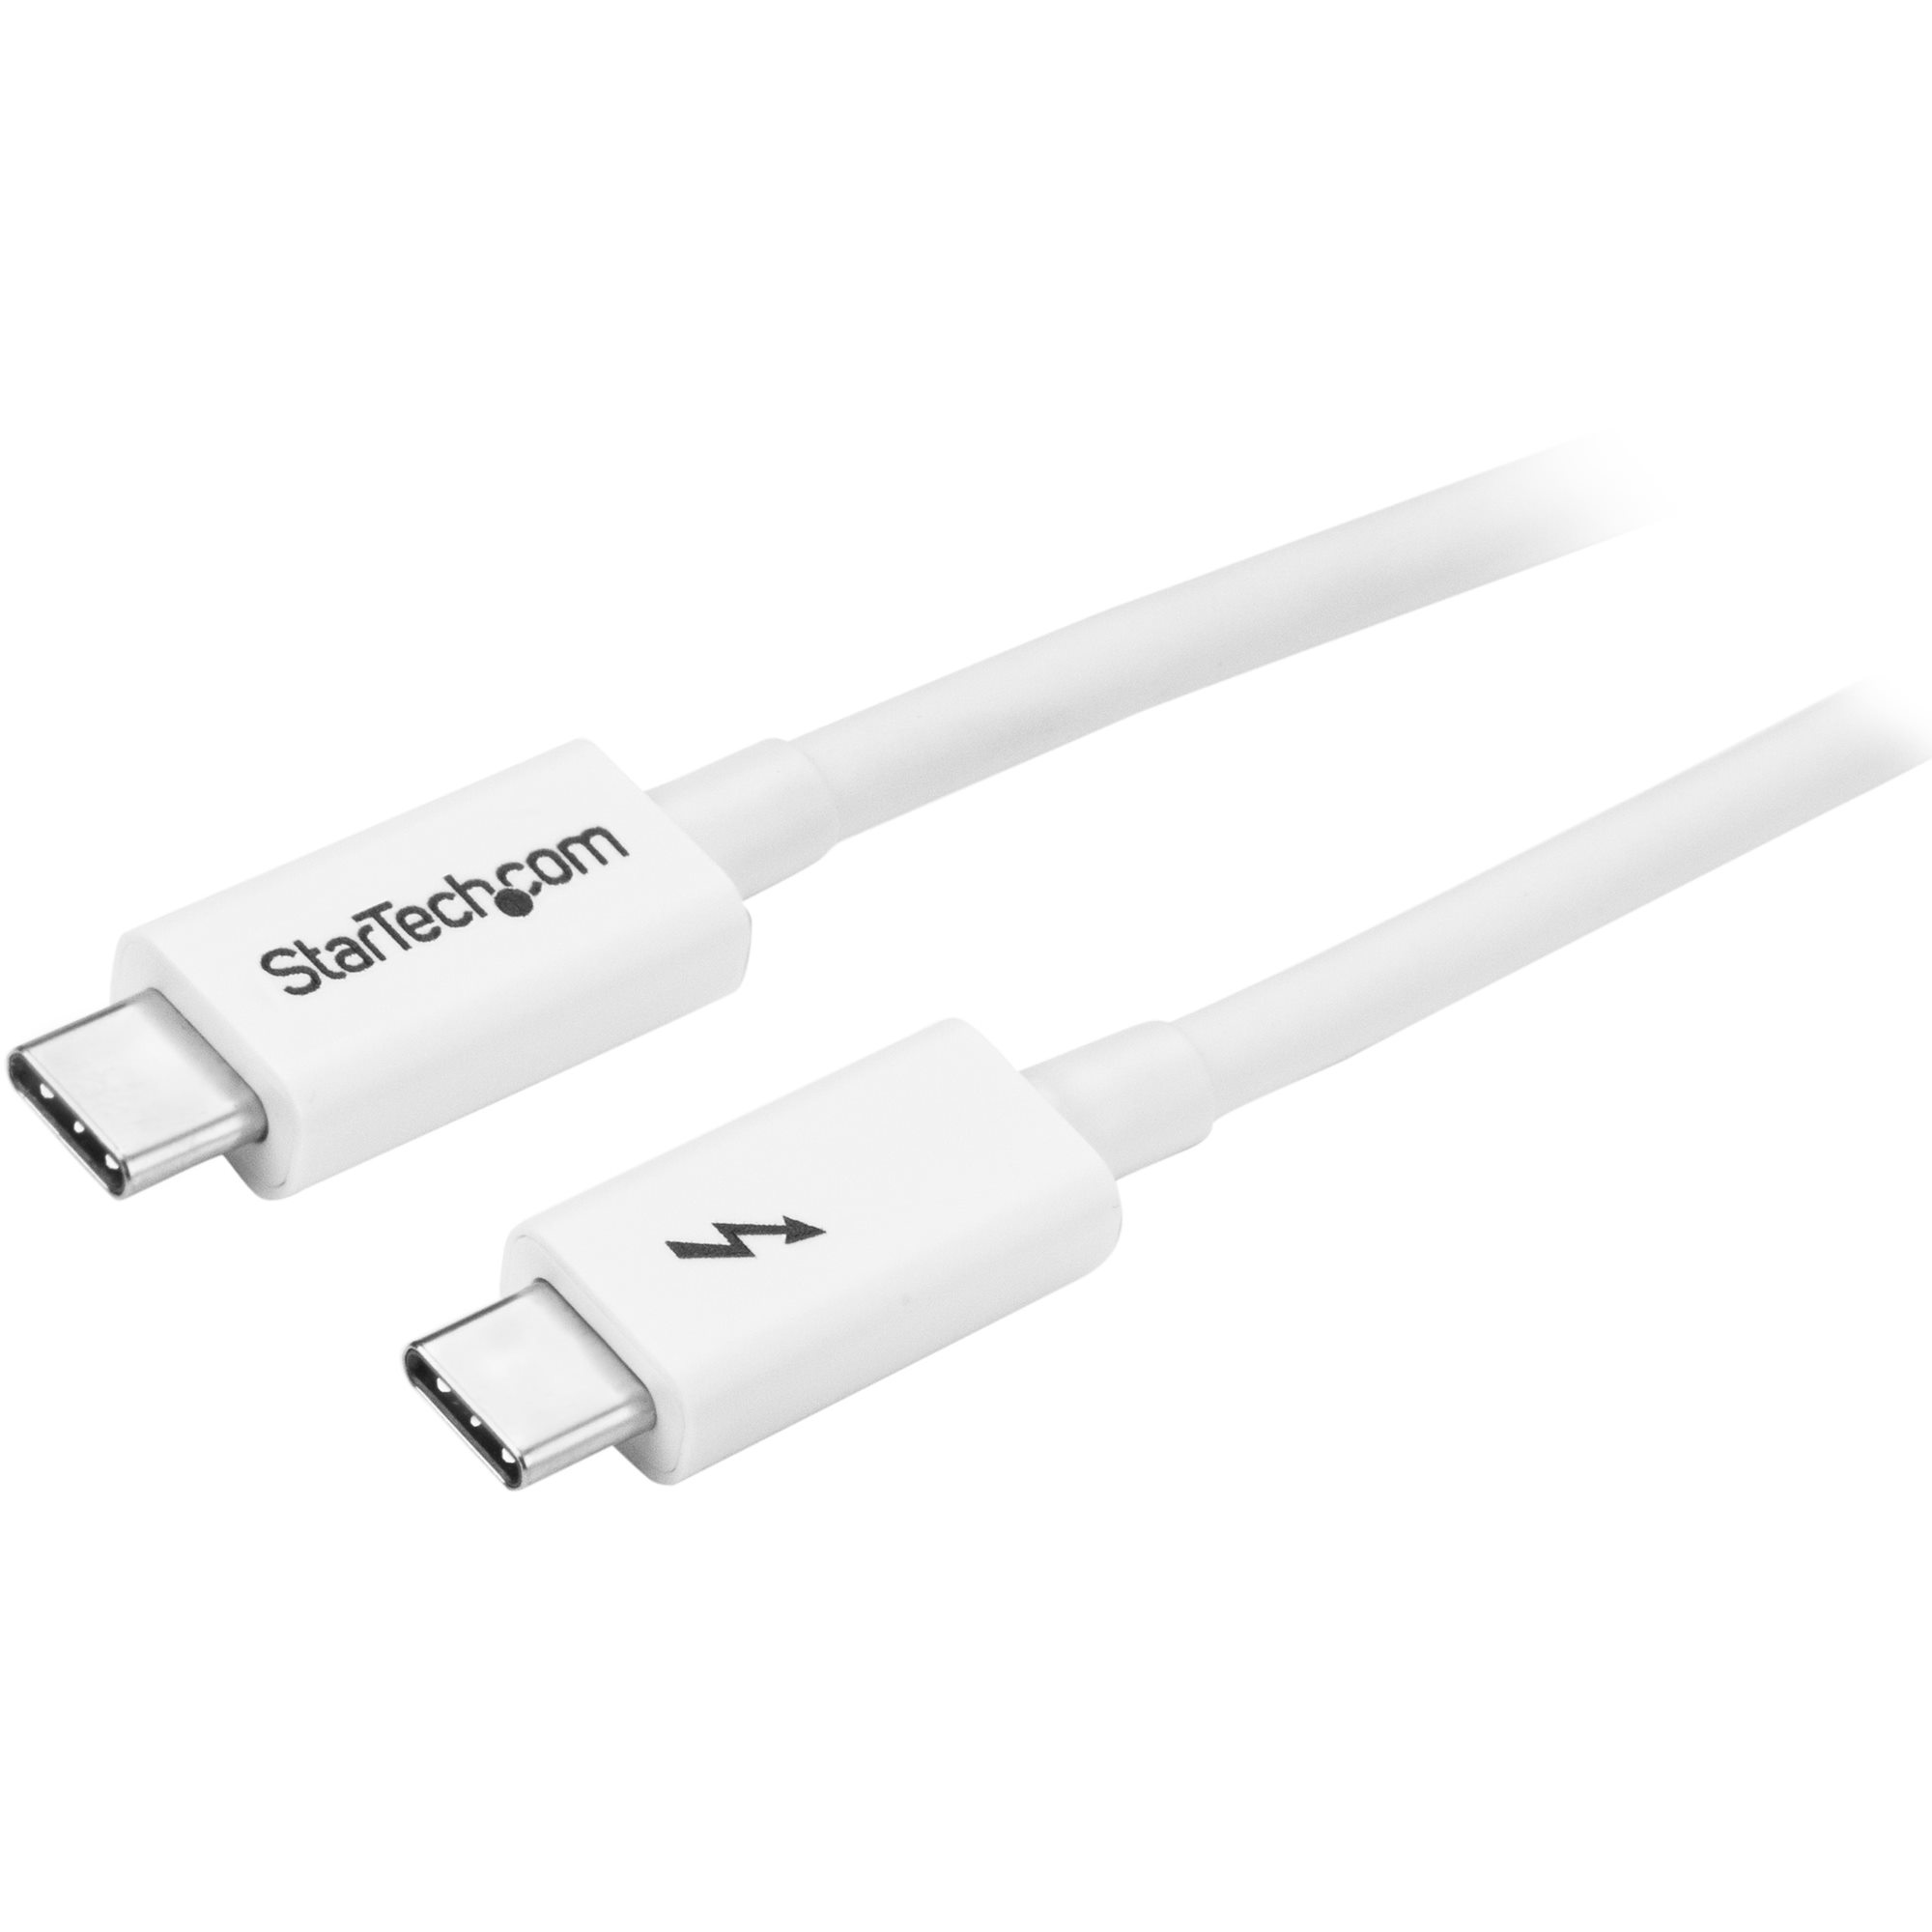 Thunderbolt Cable 1m 20Gbps White - Thunderbolt 3 Cables Adapters | StarTech.com Europe